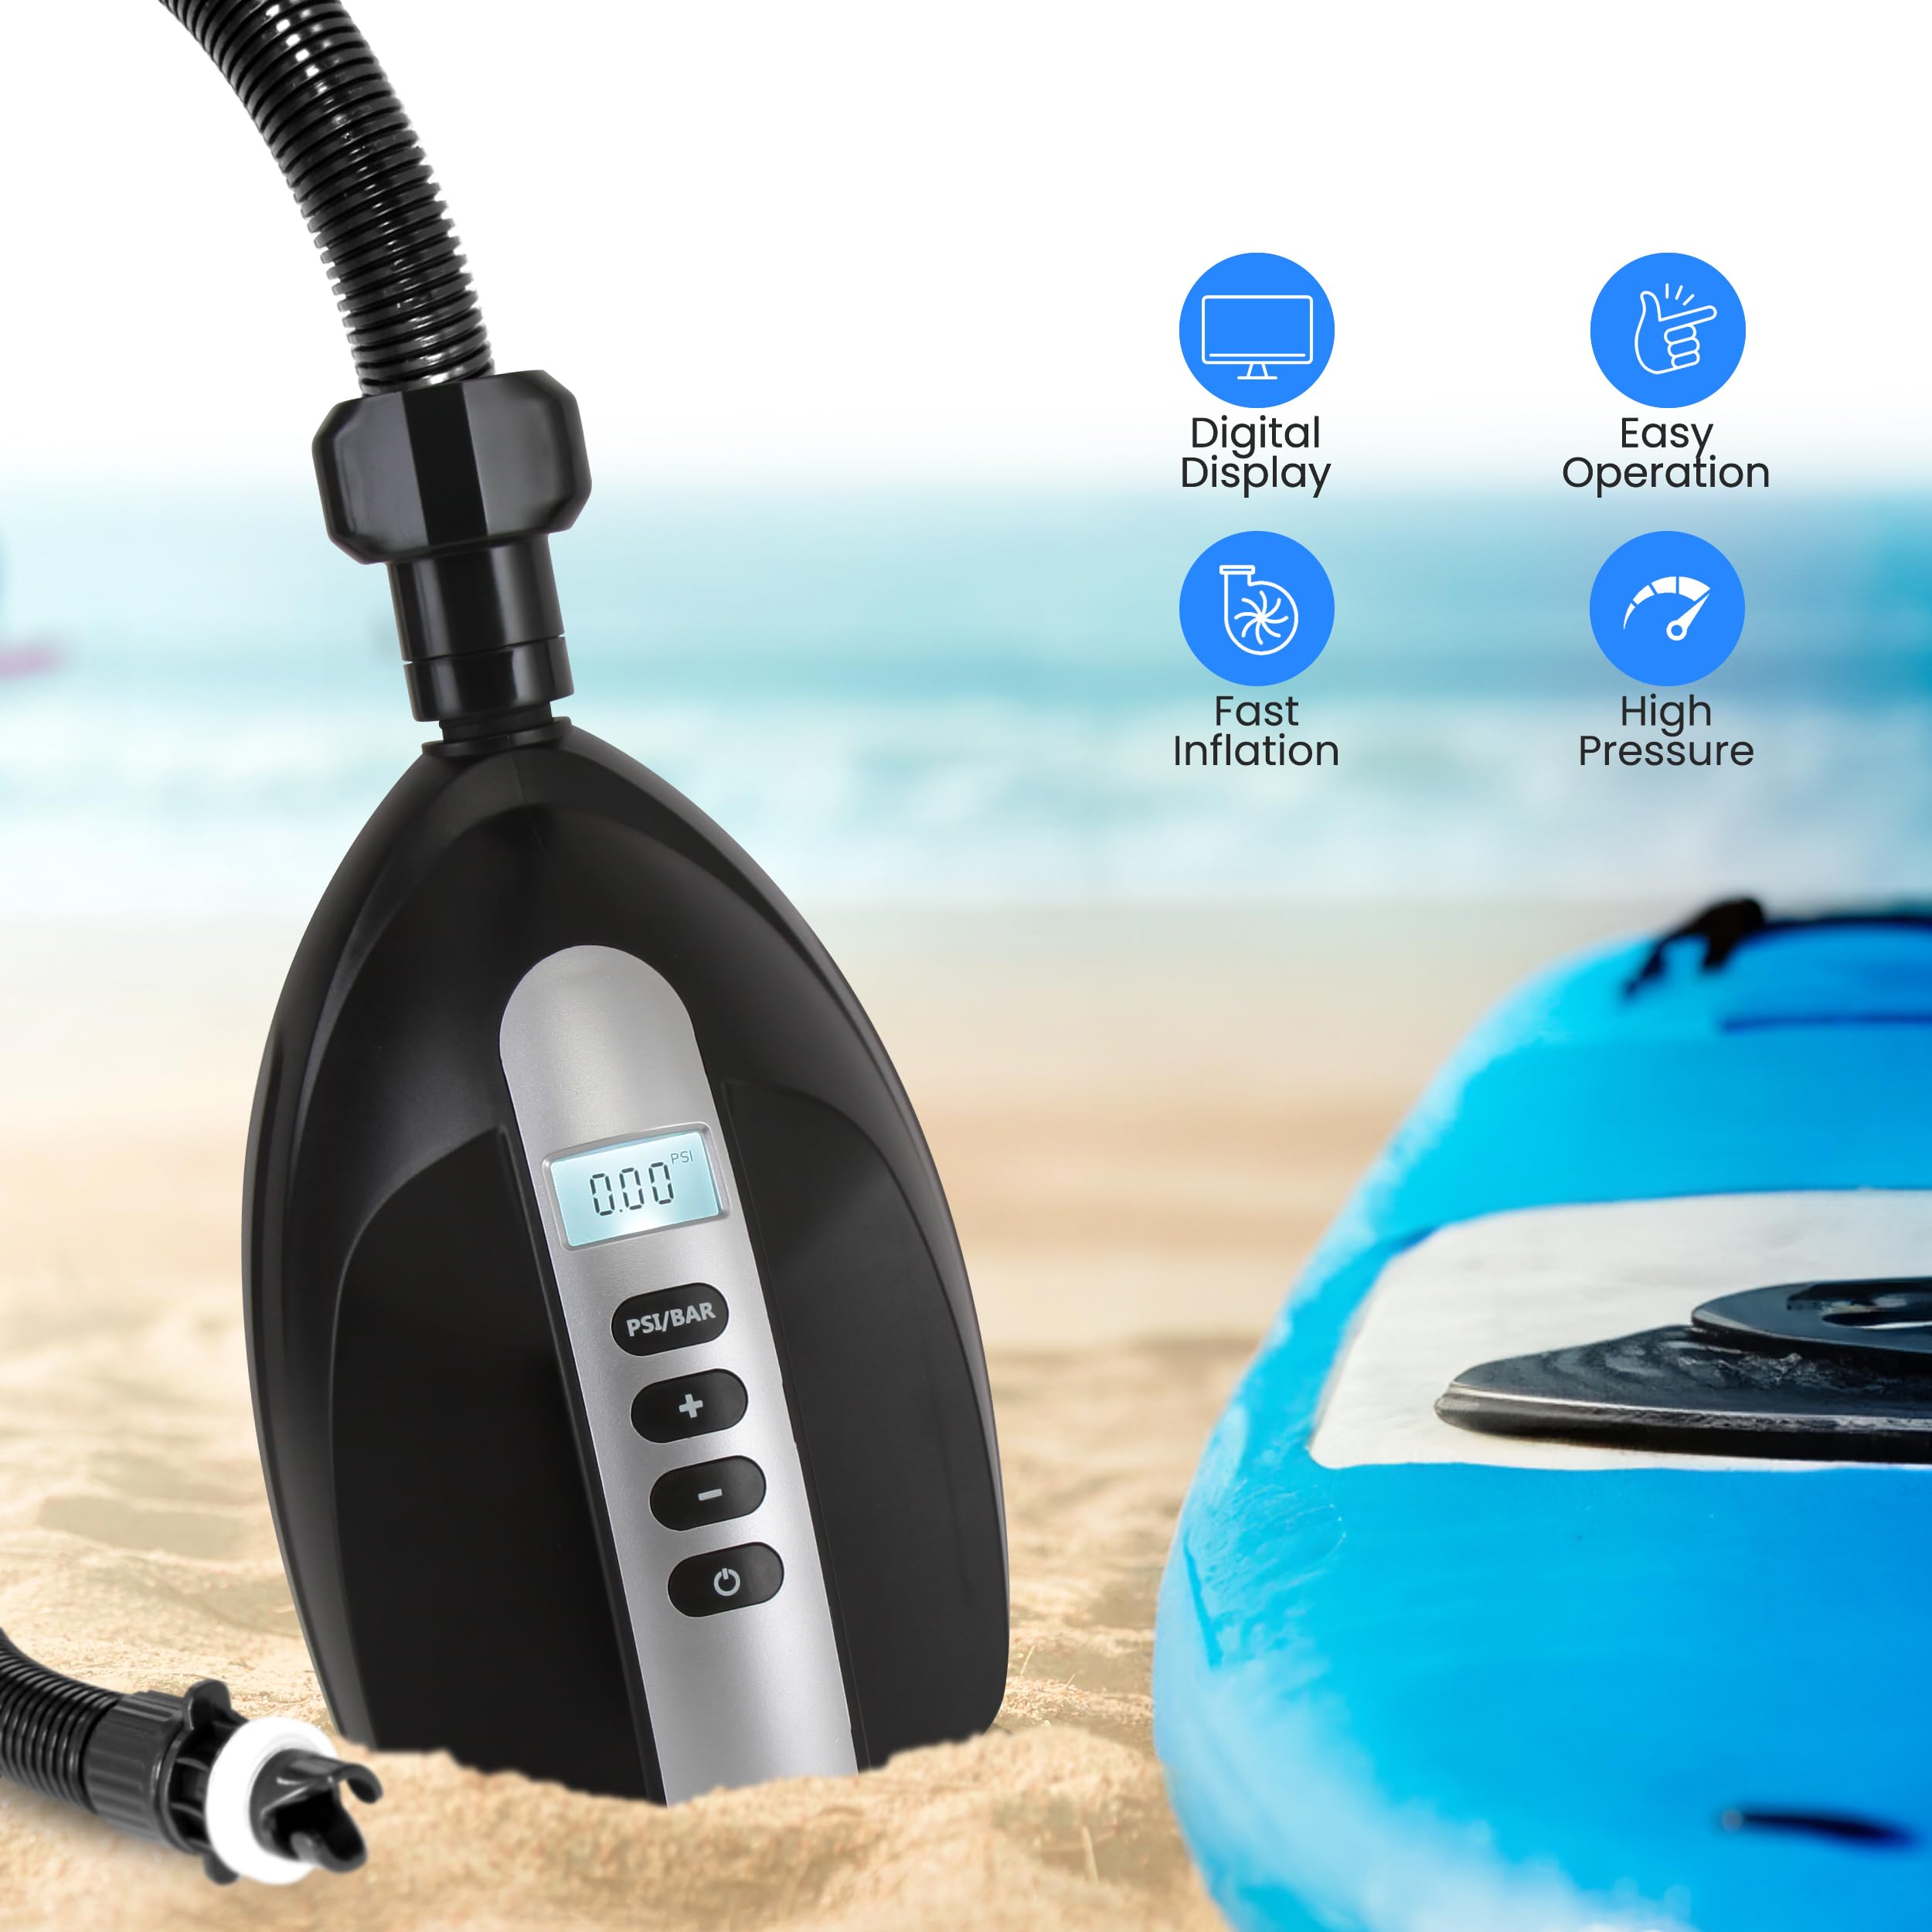 Serene Life Digital Electric Air Pump Compressor - 110W 12 Volt Quick Air Inflator w/LCD, 0-16 Adjustable PSI - For Water Sport Inflatable SUP Stand Up Paddle Board - SereneLife SLPUMP20